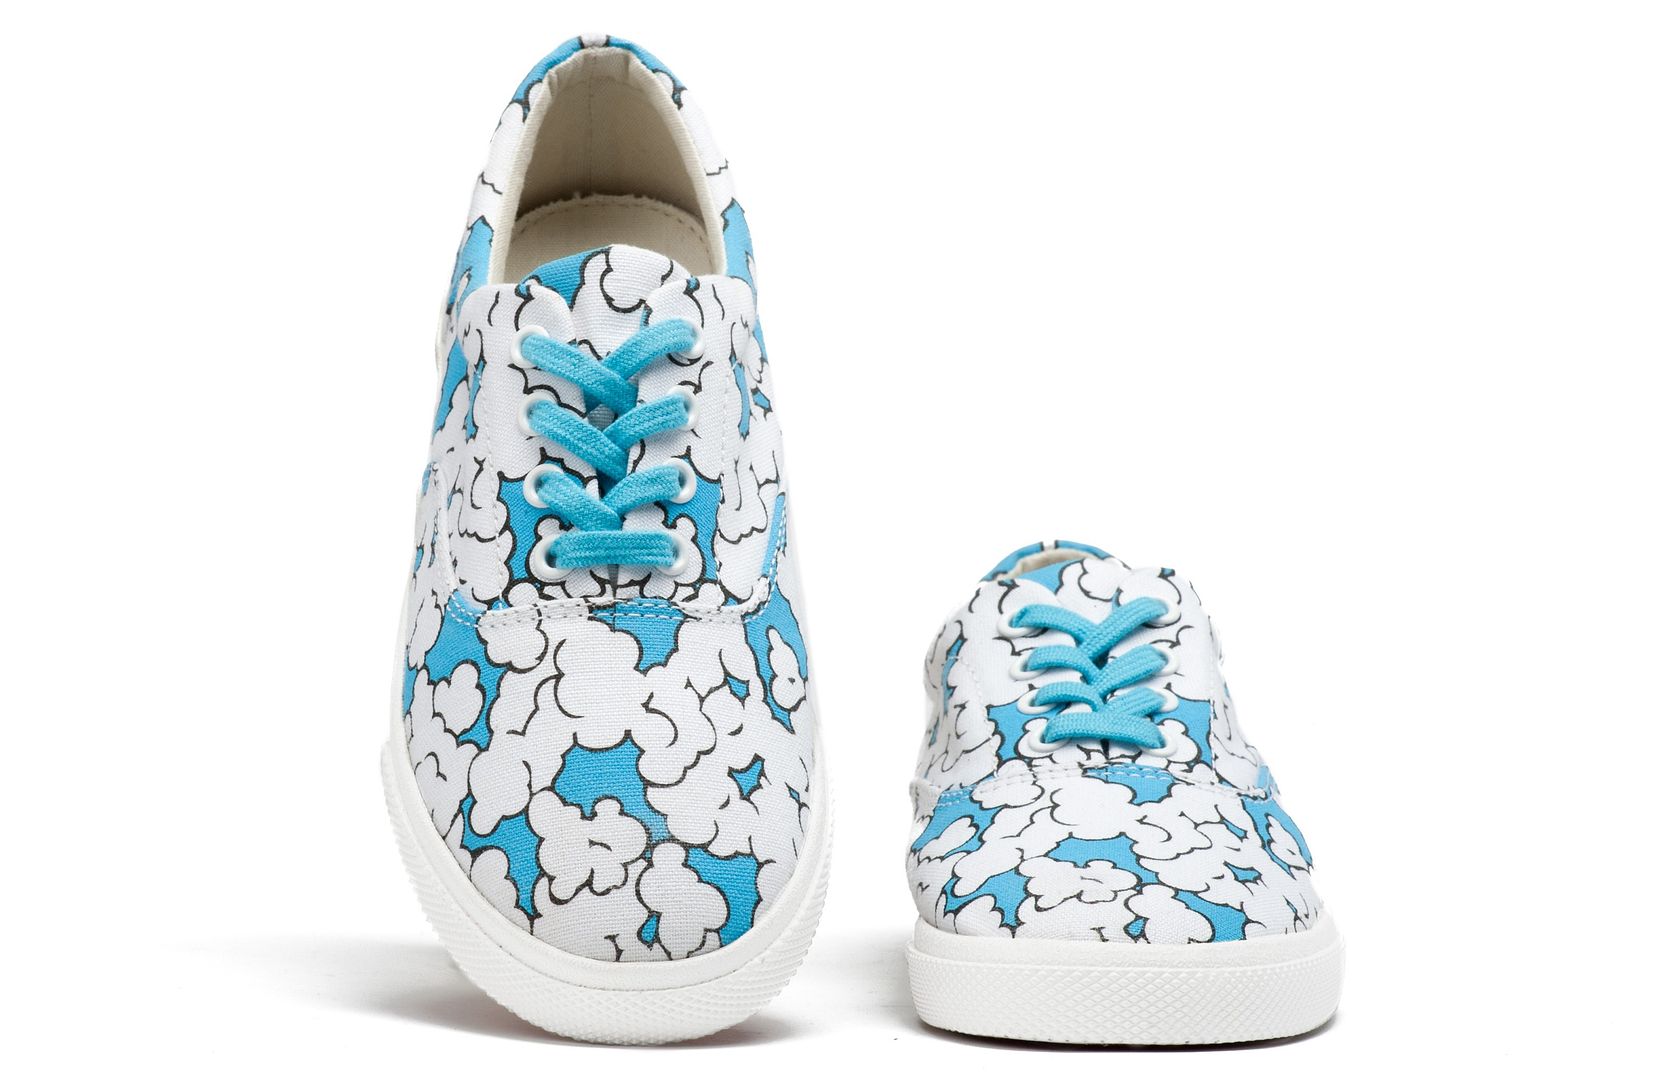 Cloud style artist-drawn shoes for kid at Bucketfeet